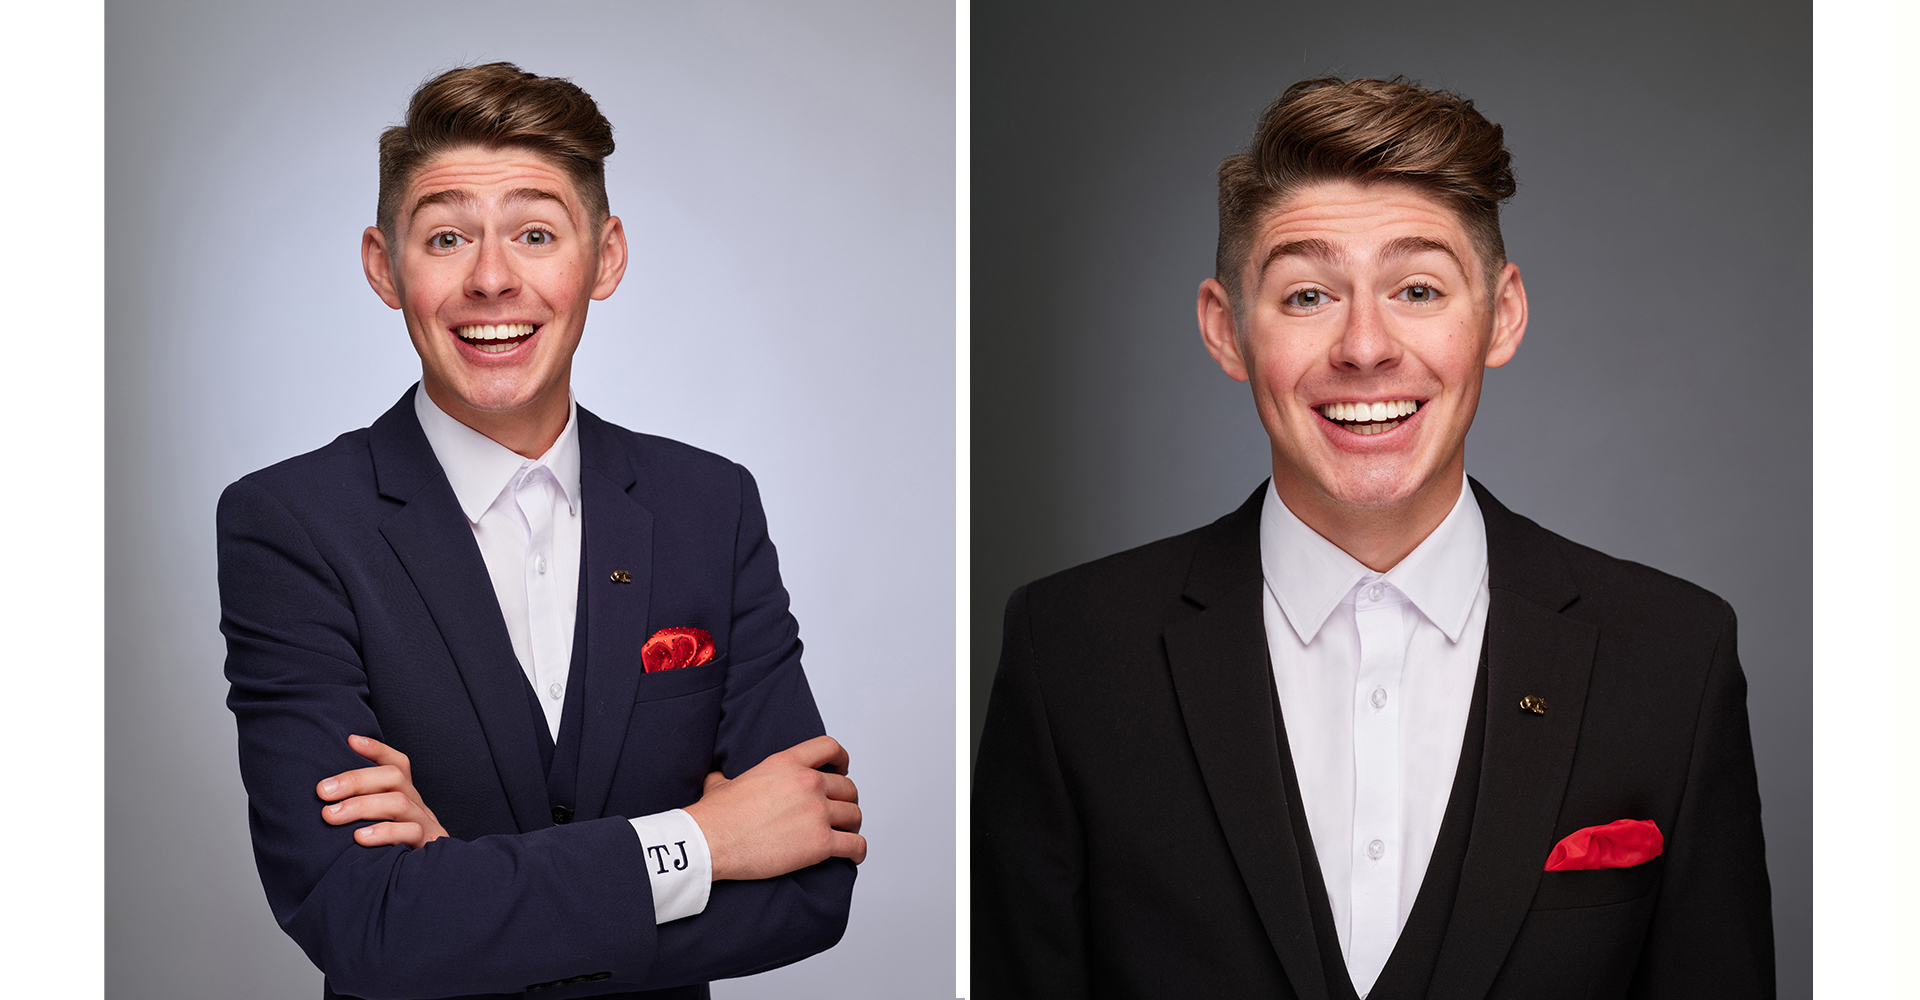 tv presenter head shots wearing a suite front of grey backdrop